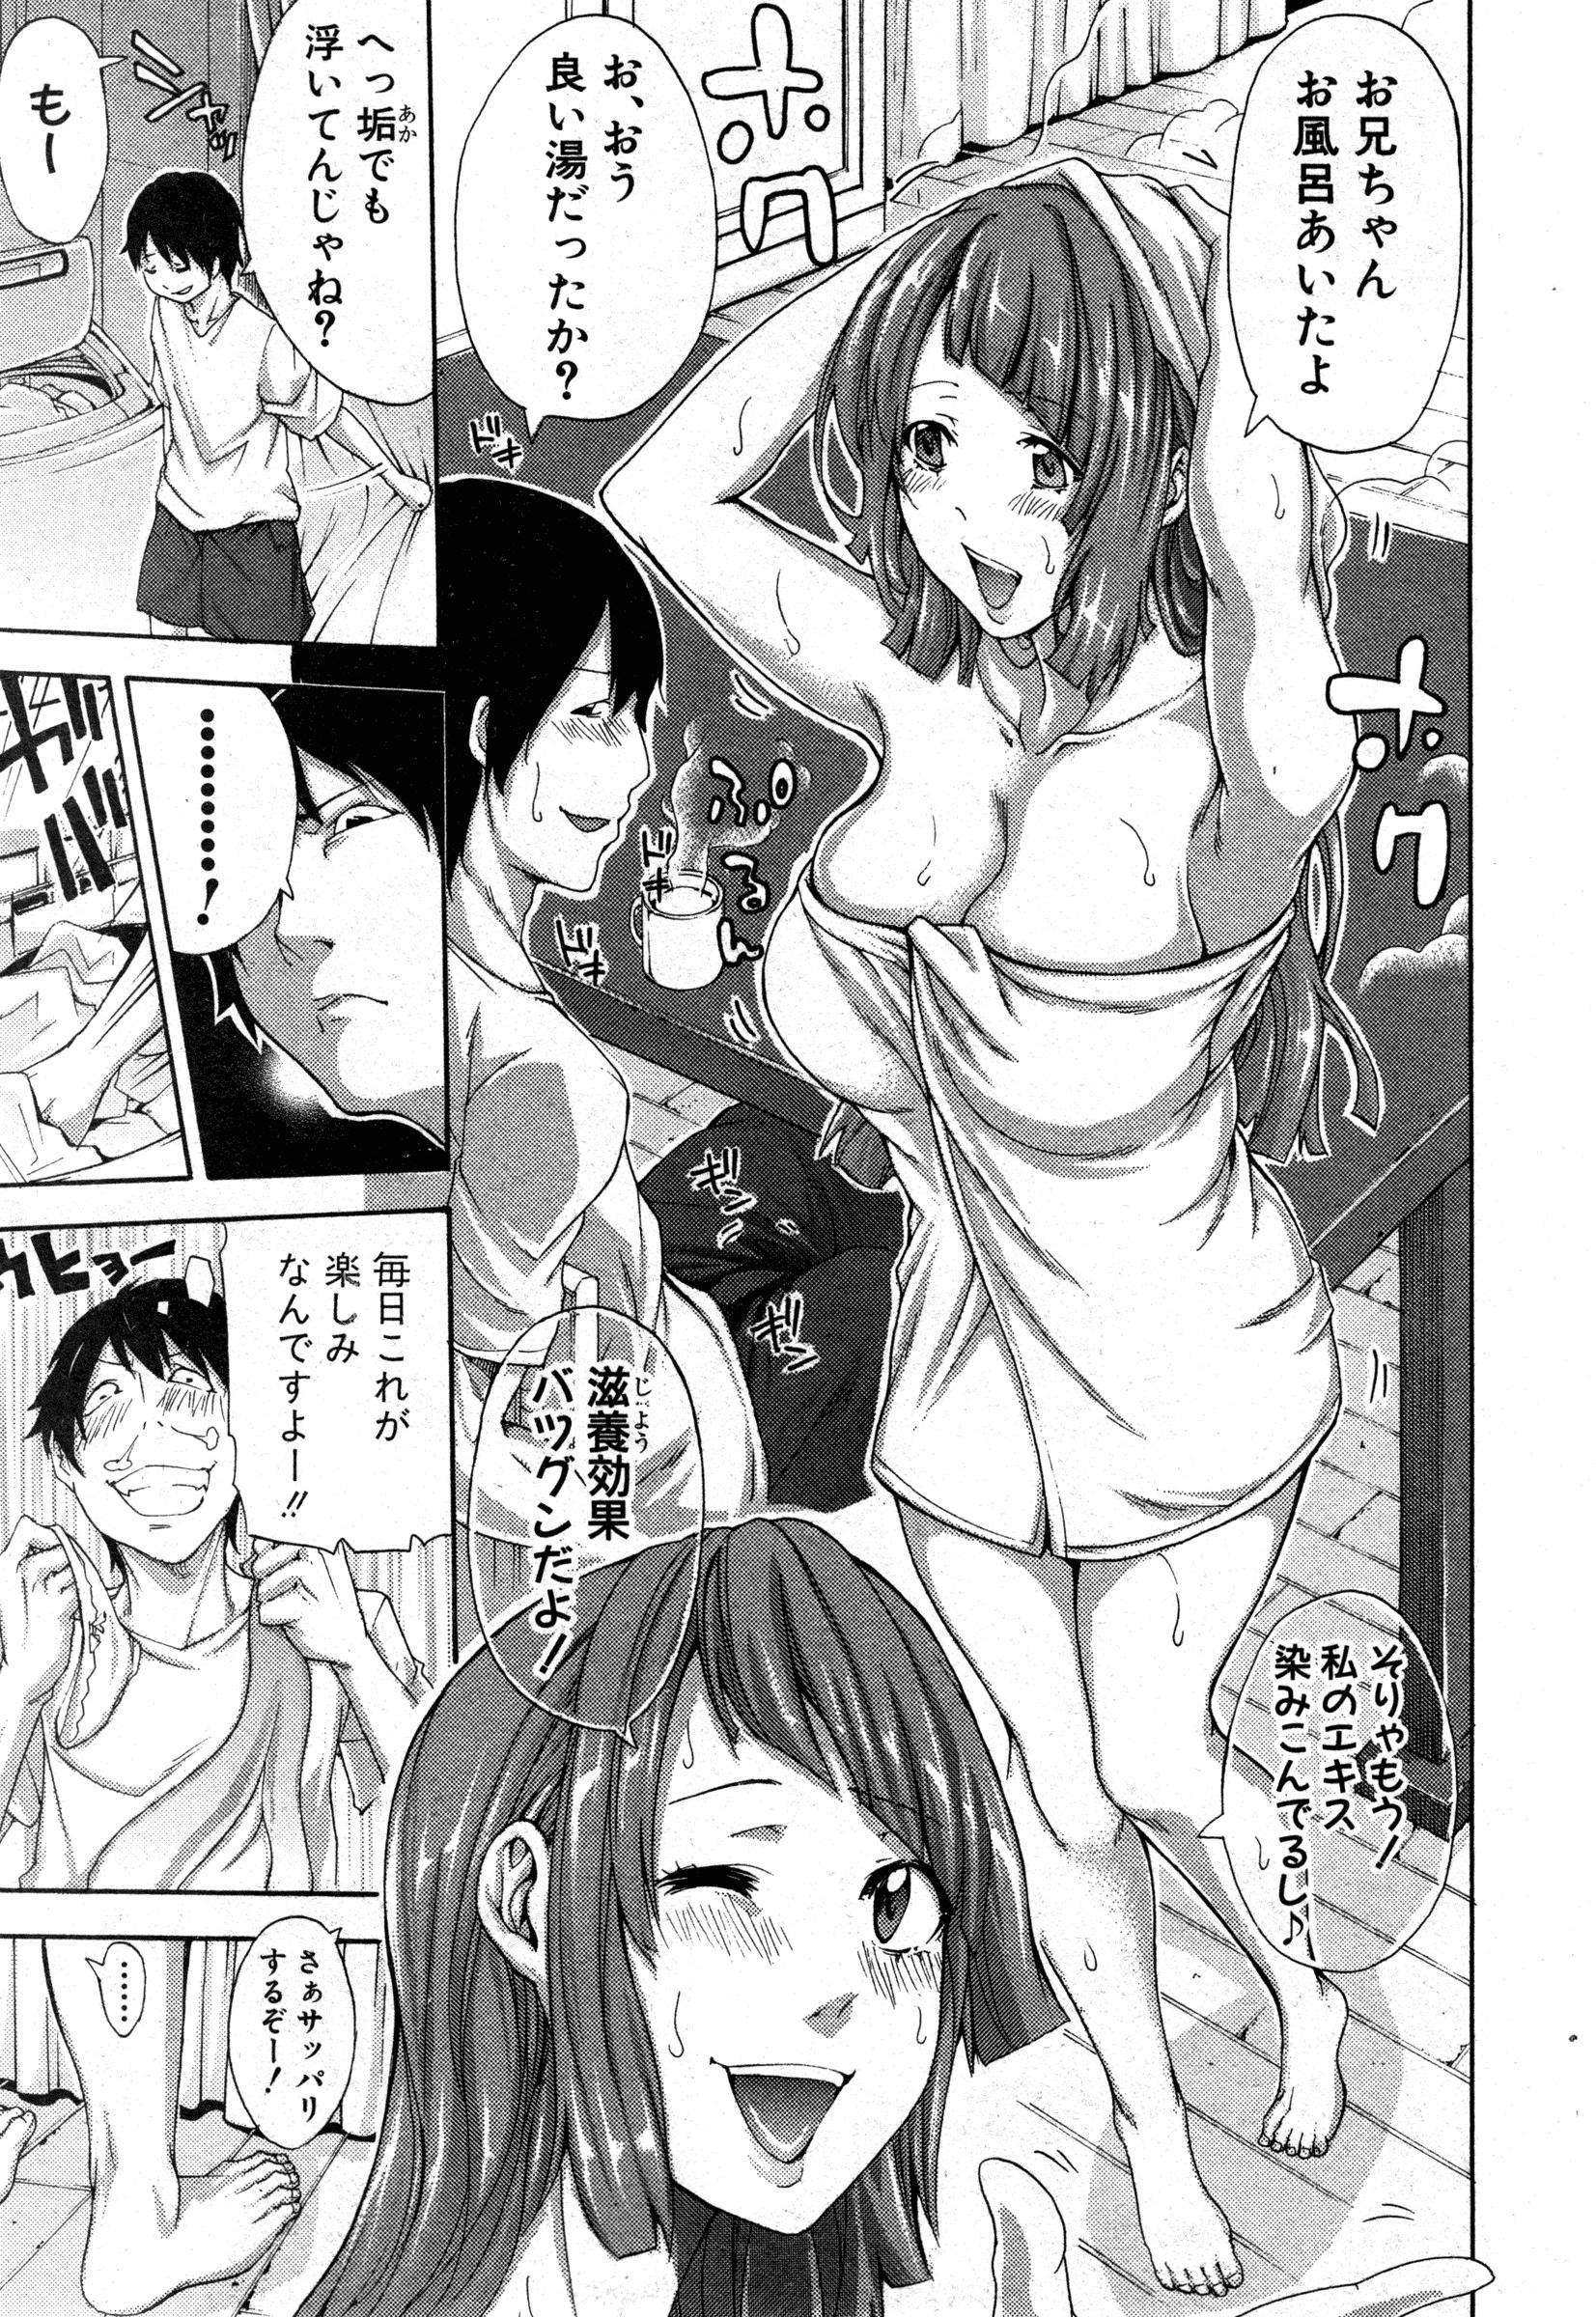 Missionary Porn Bro x Sis Ch. 1-3 Sharing - Page 3